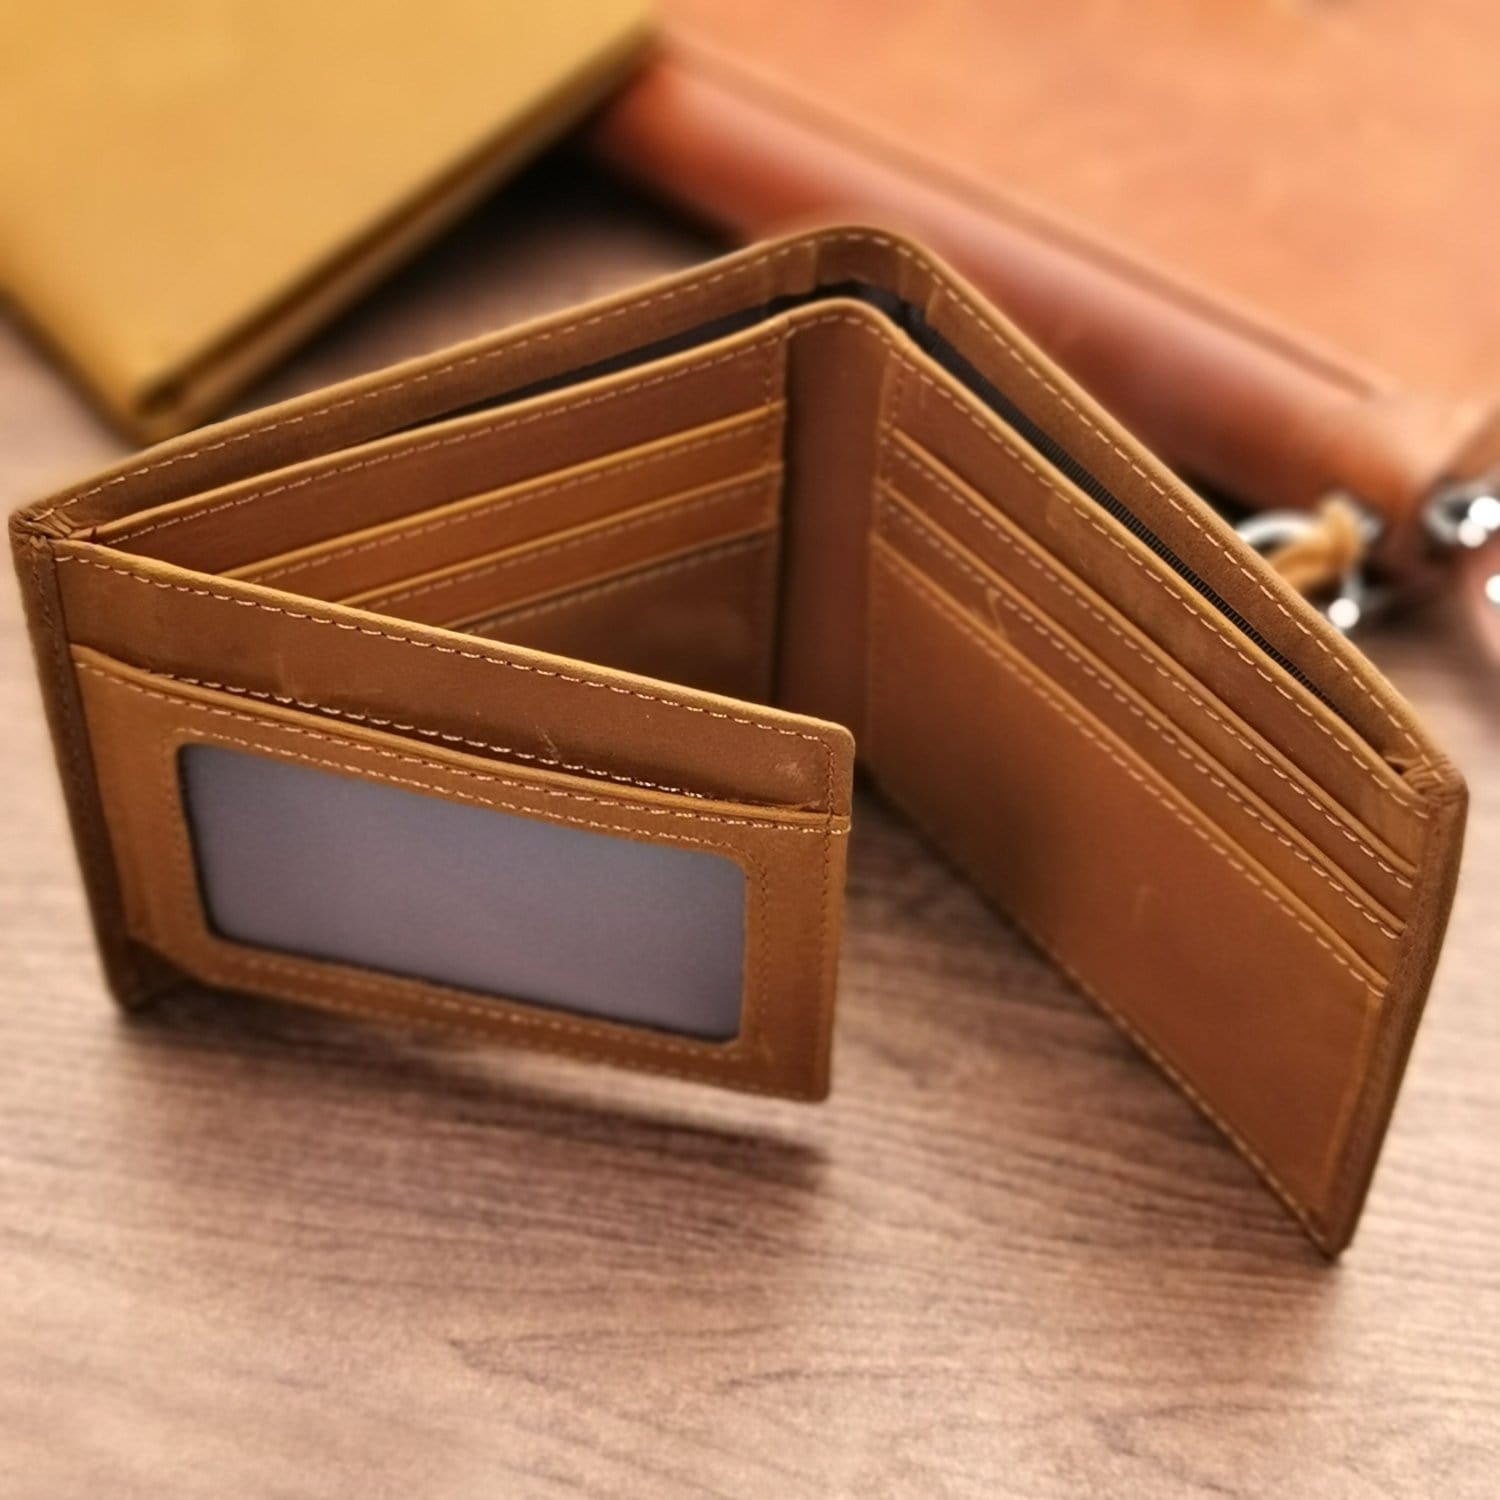 Wallets To Our Son - We Love You Bifold Leather Wallet Gift Card GiveMe-Gifts